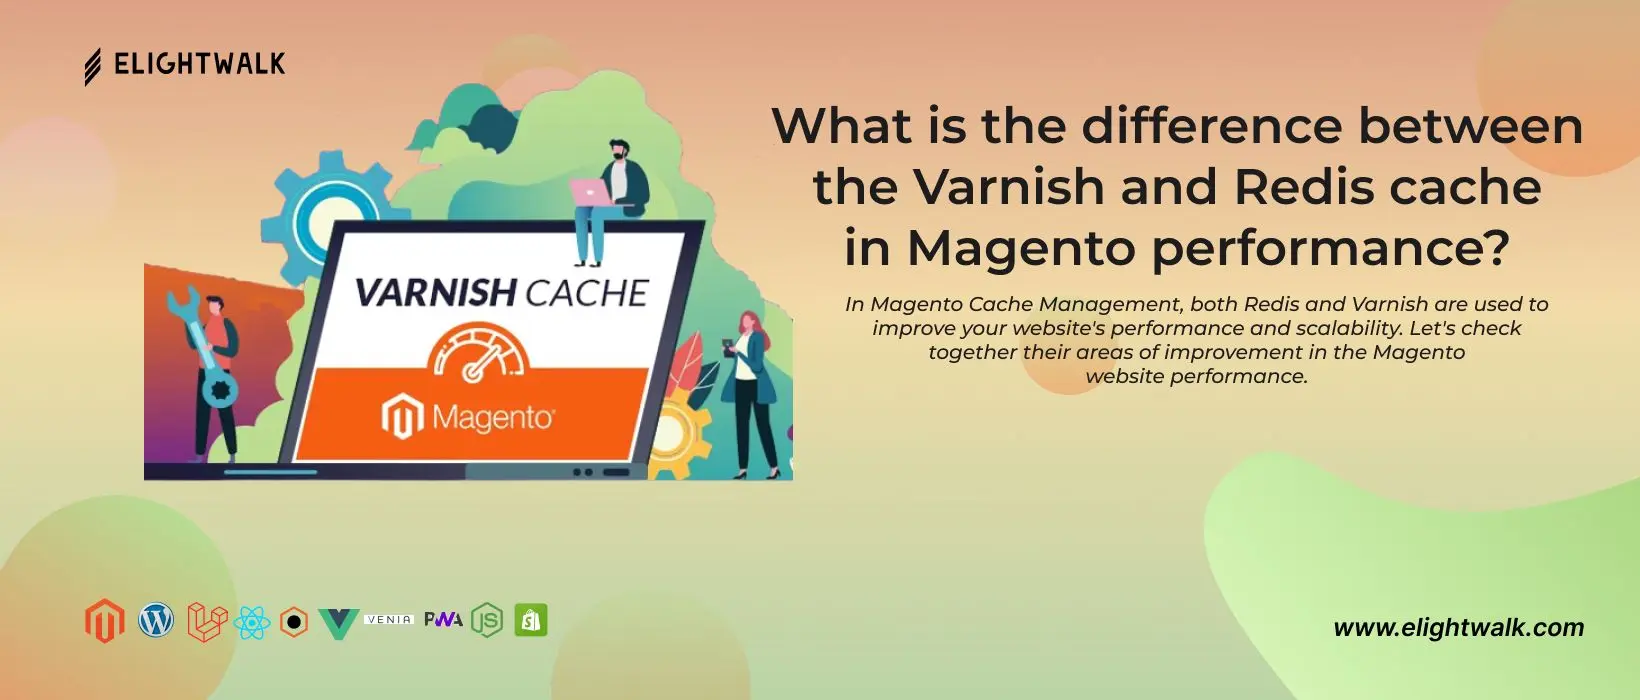 difference between the Varnish and Redis cache in Magento performance?